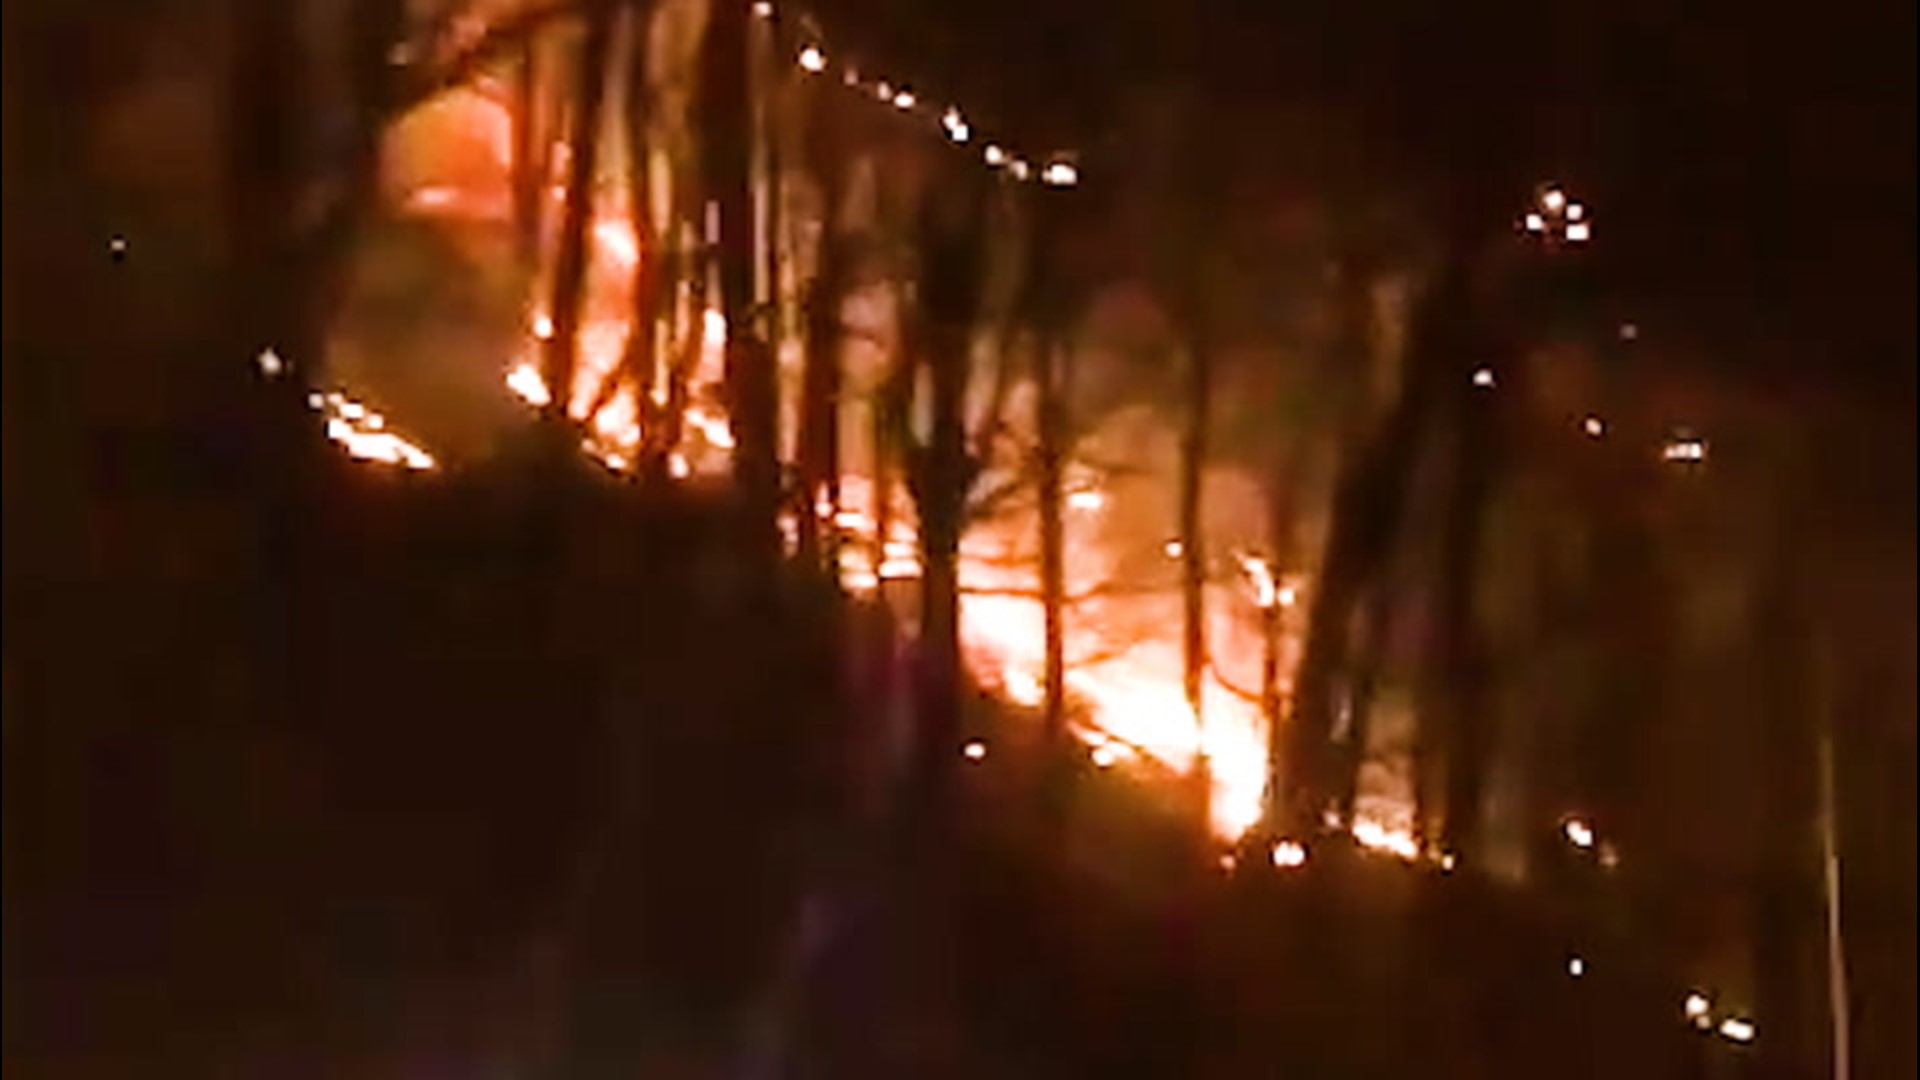 Firefighters are fighting a large fire on the border of New Jersey and Pennsylvania as of Feb. 24. The fire is on Mount Tammany on the New Jersey side of the border.